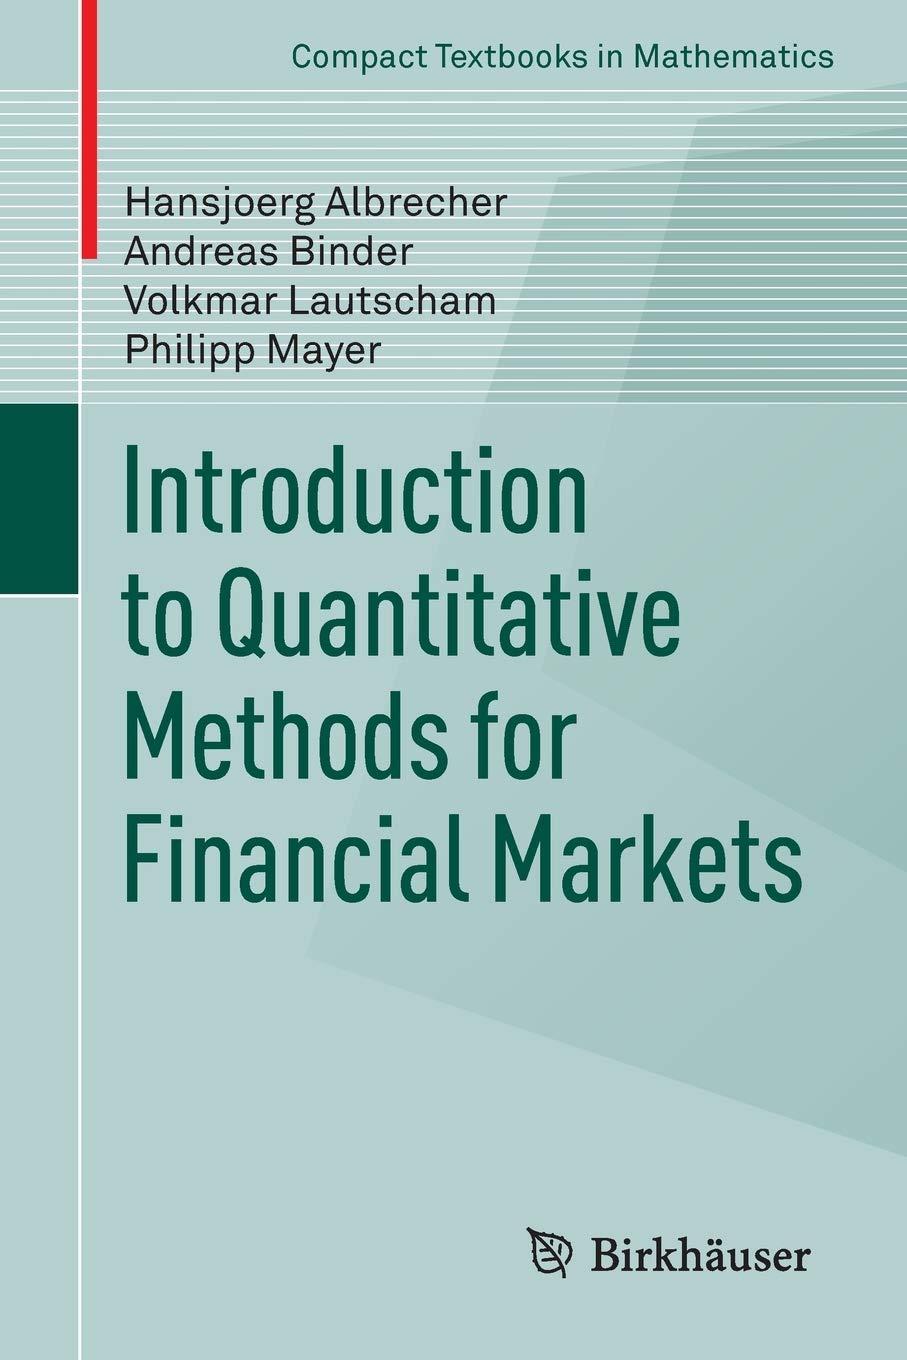 introduction to quantitative methods for financial markets 1st edition hansjoerg albrecher, andreas binder,